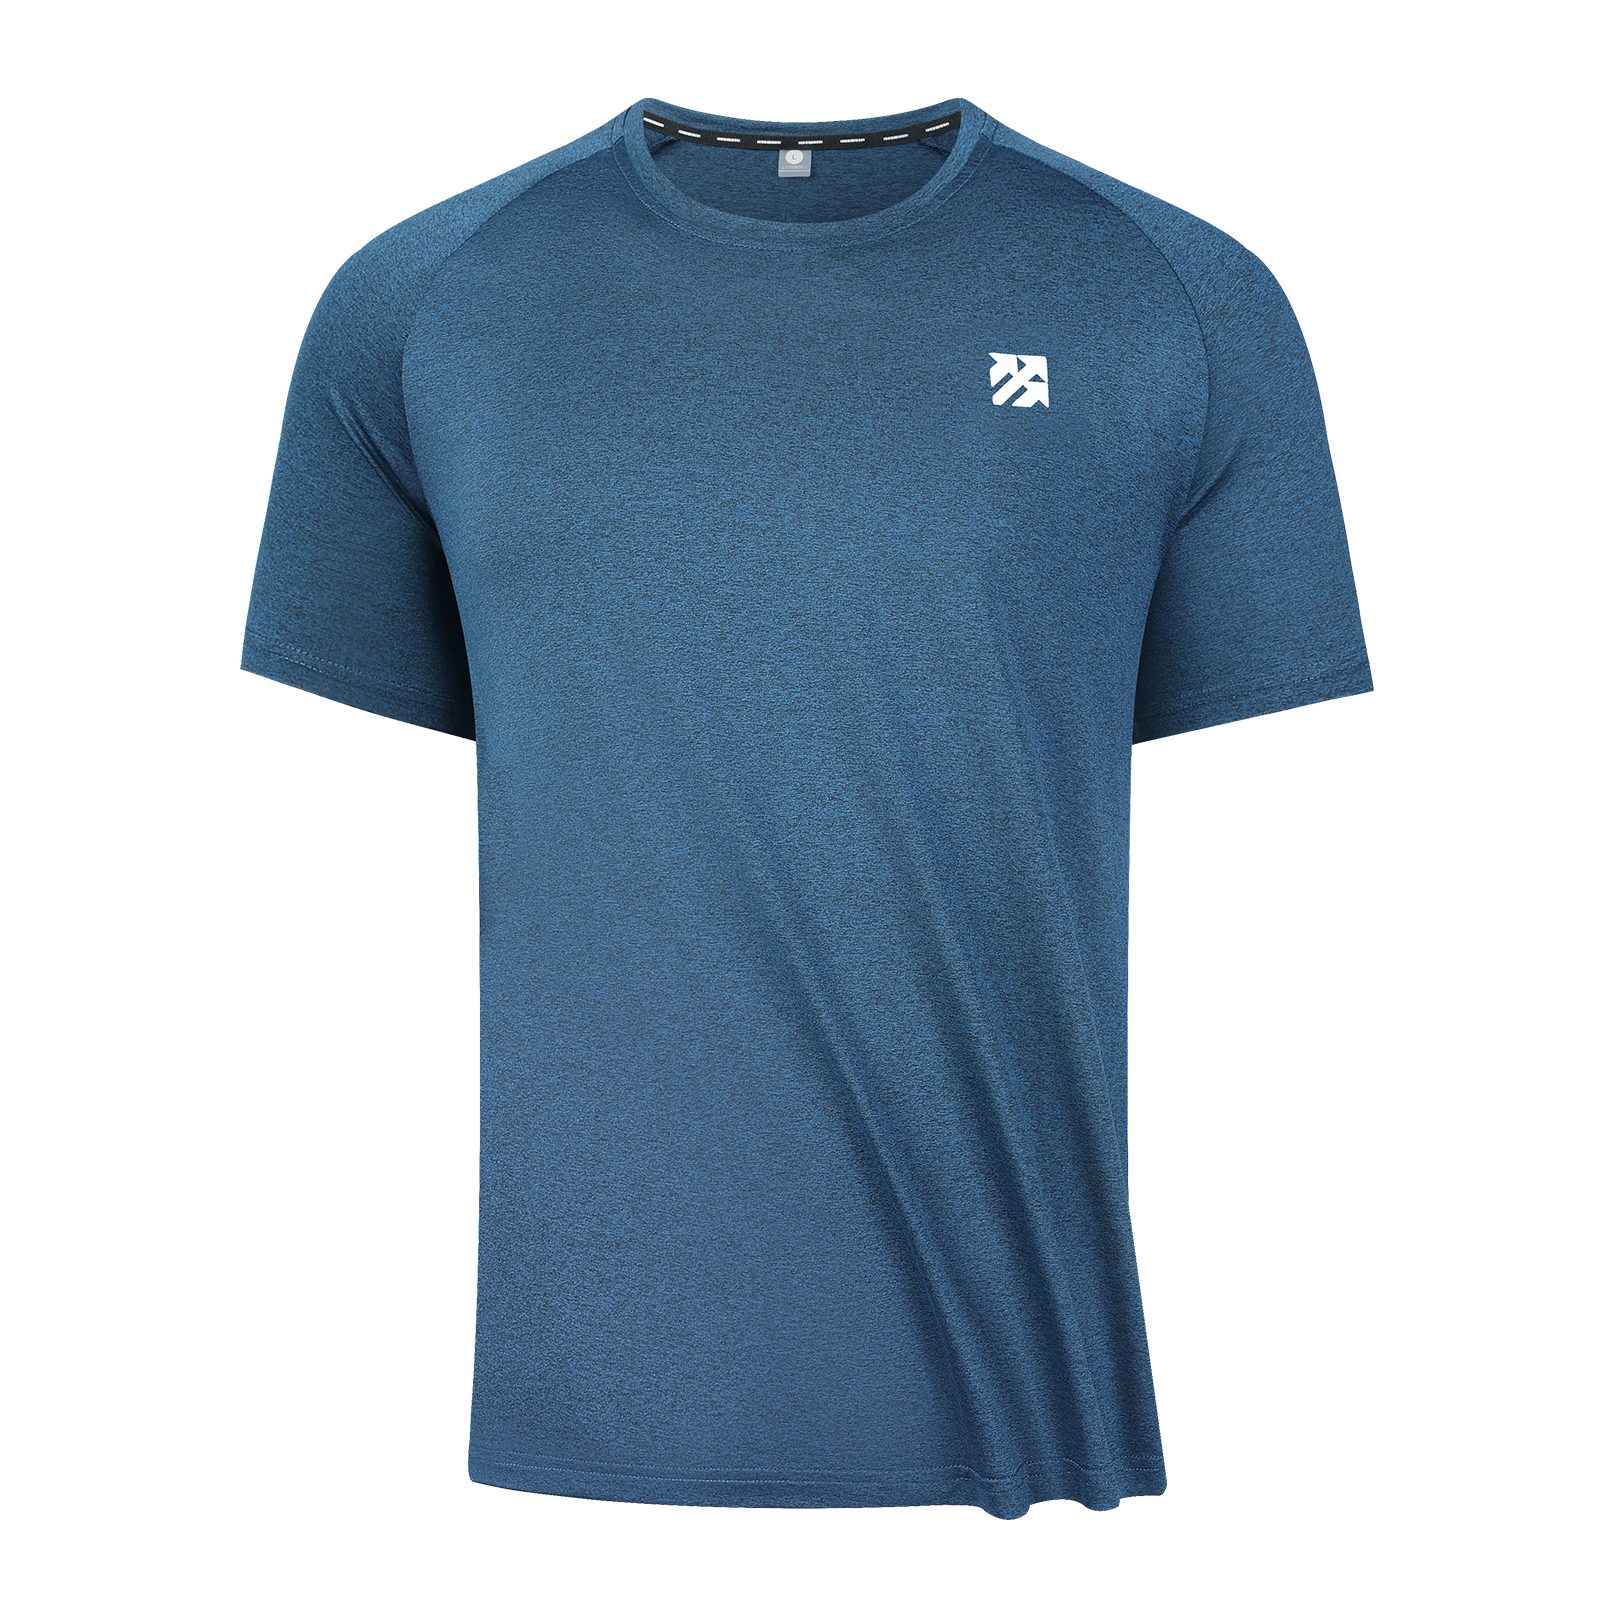  Men's Breathable Cationic Sports T-Shirt